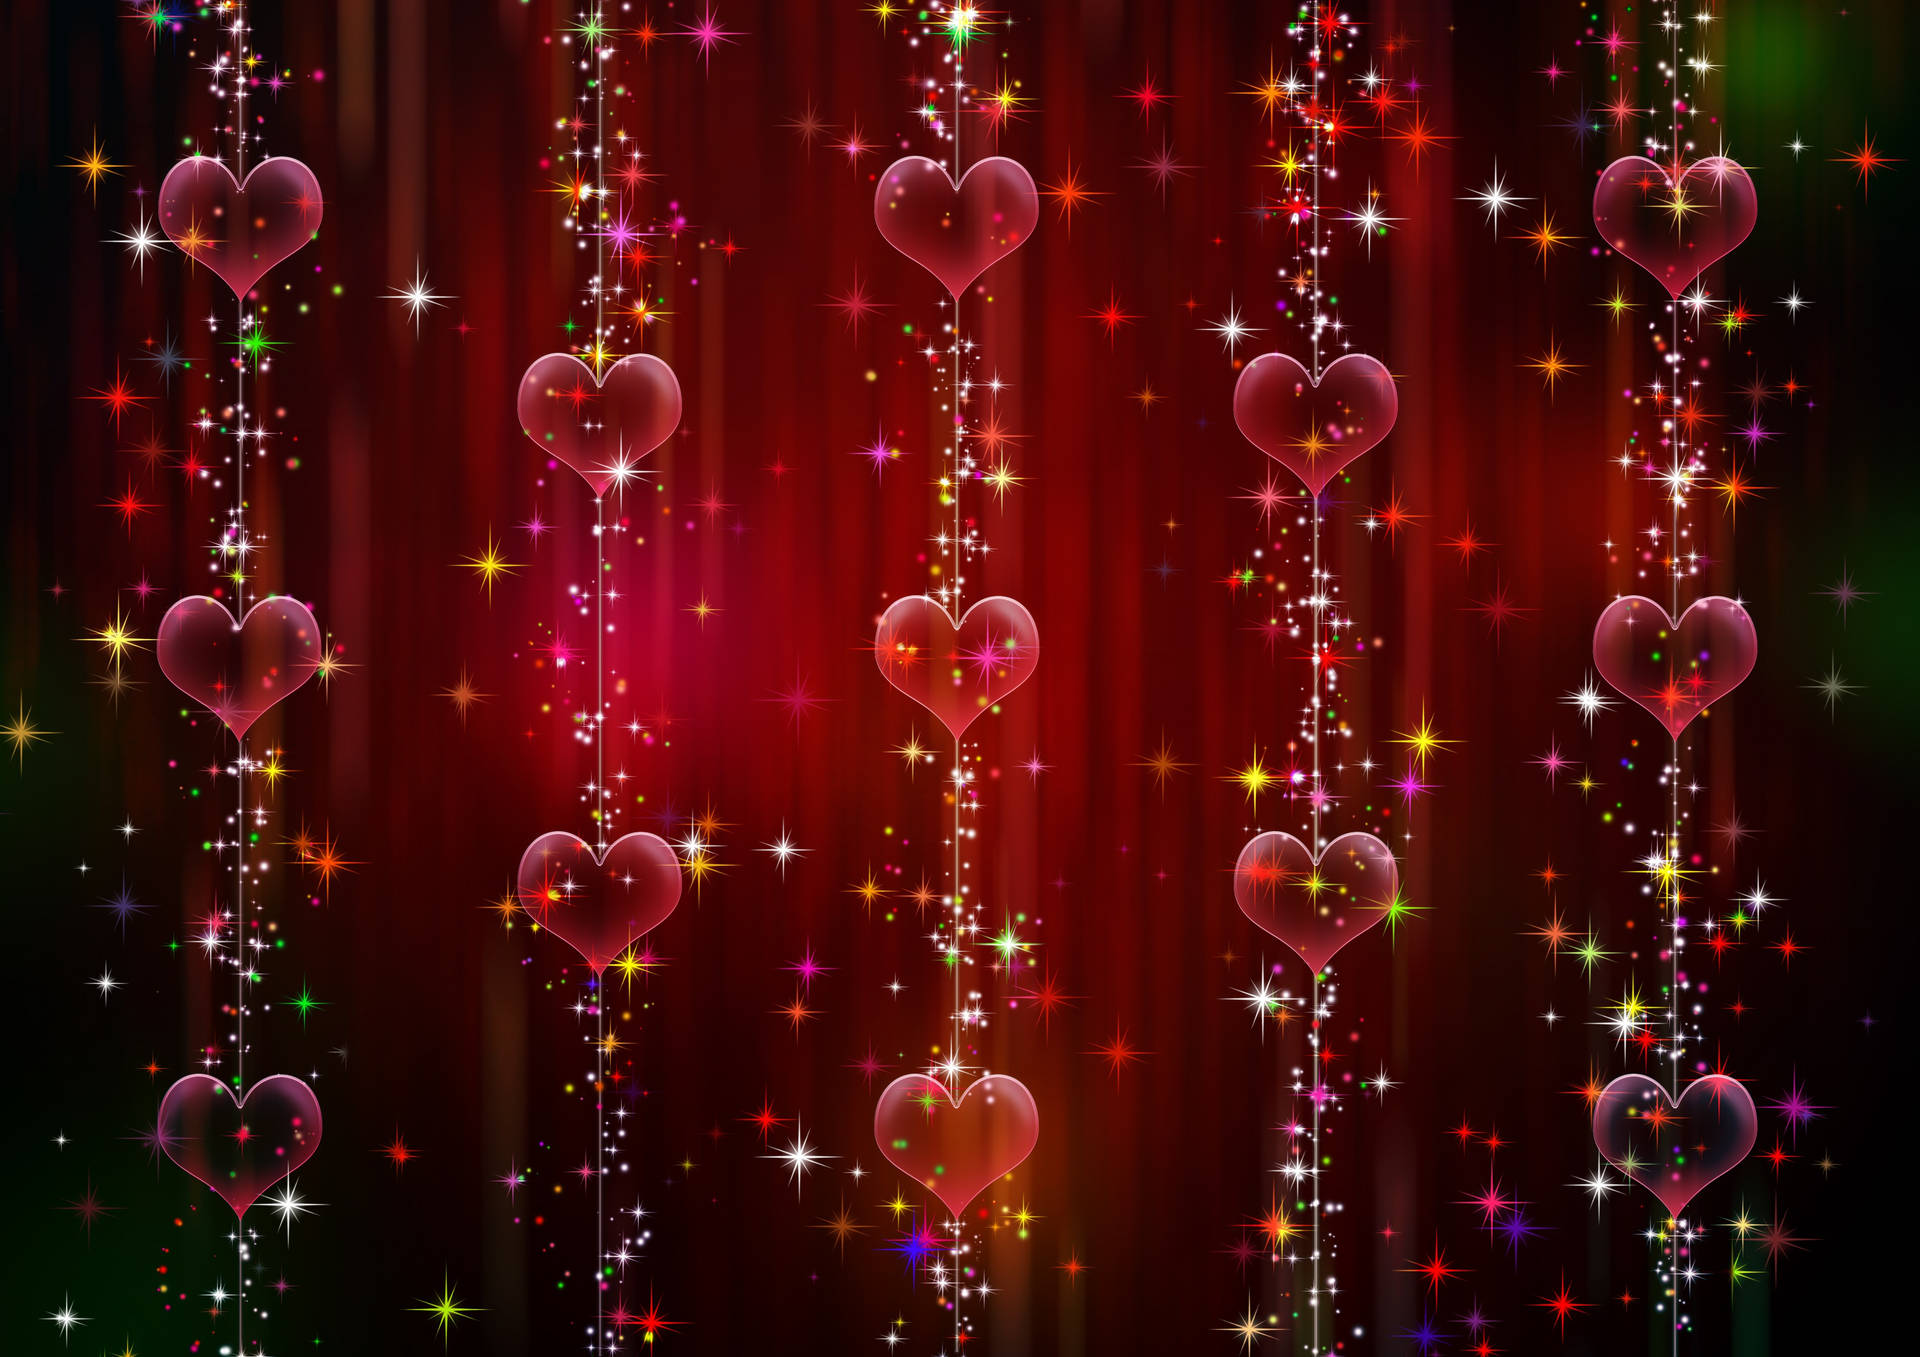 Shiny Red Hearts On Curtain Wallpaper